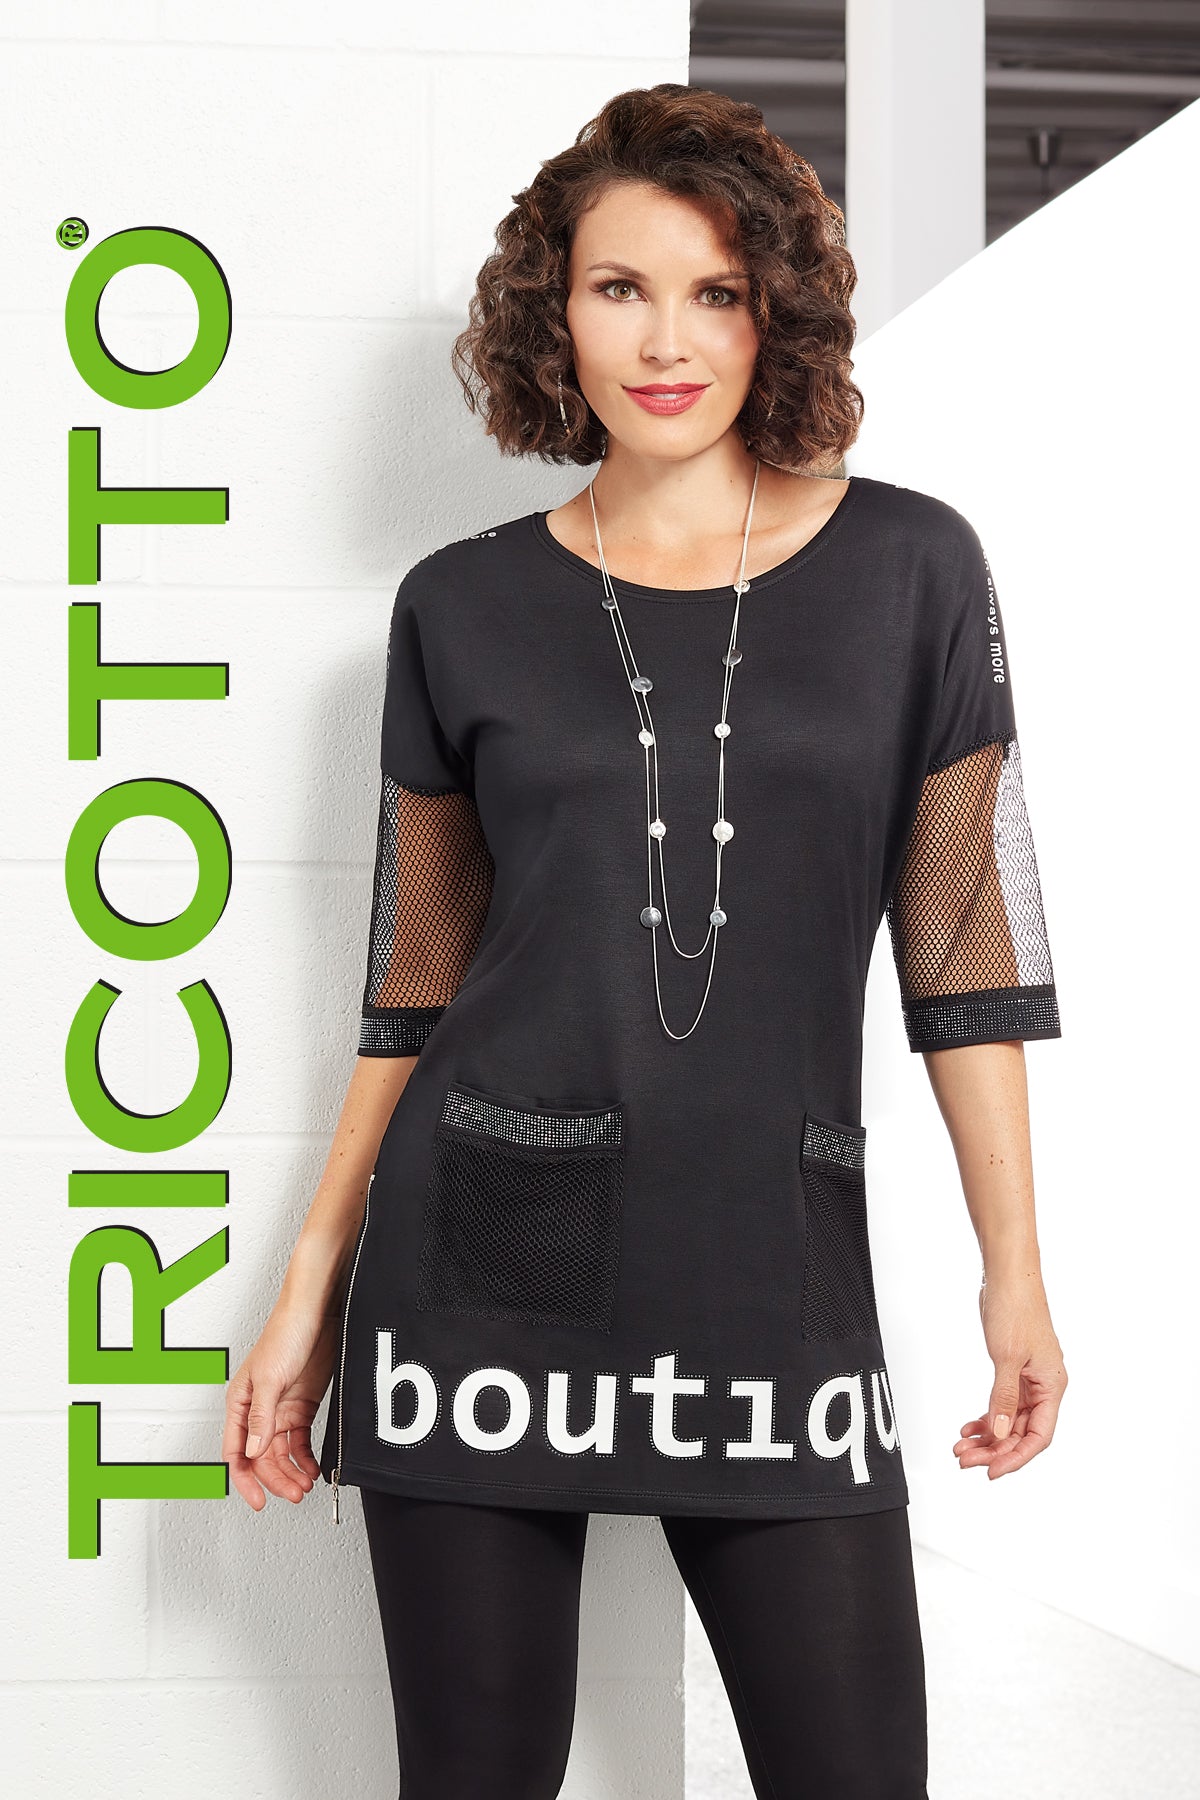 Tricotto Dresses-Buy Tricotto Clothing Online-Tricotto Tops-Tricotto Clothing Quebec-Tricotto Clothing Montreal-Jane & John Clothing-Tricotto Online Shop